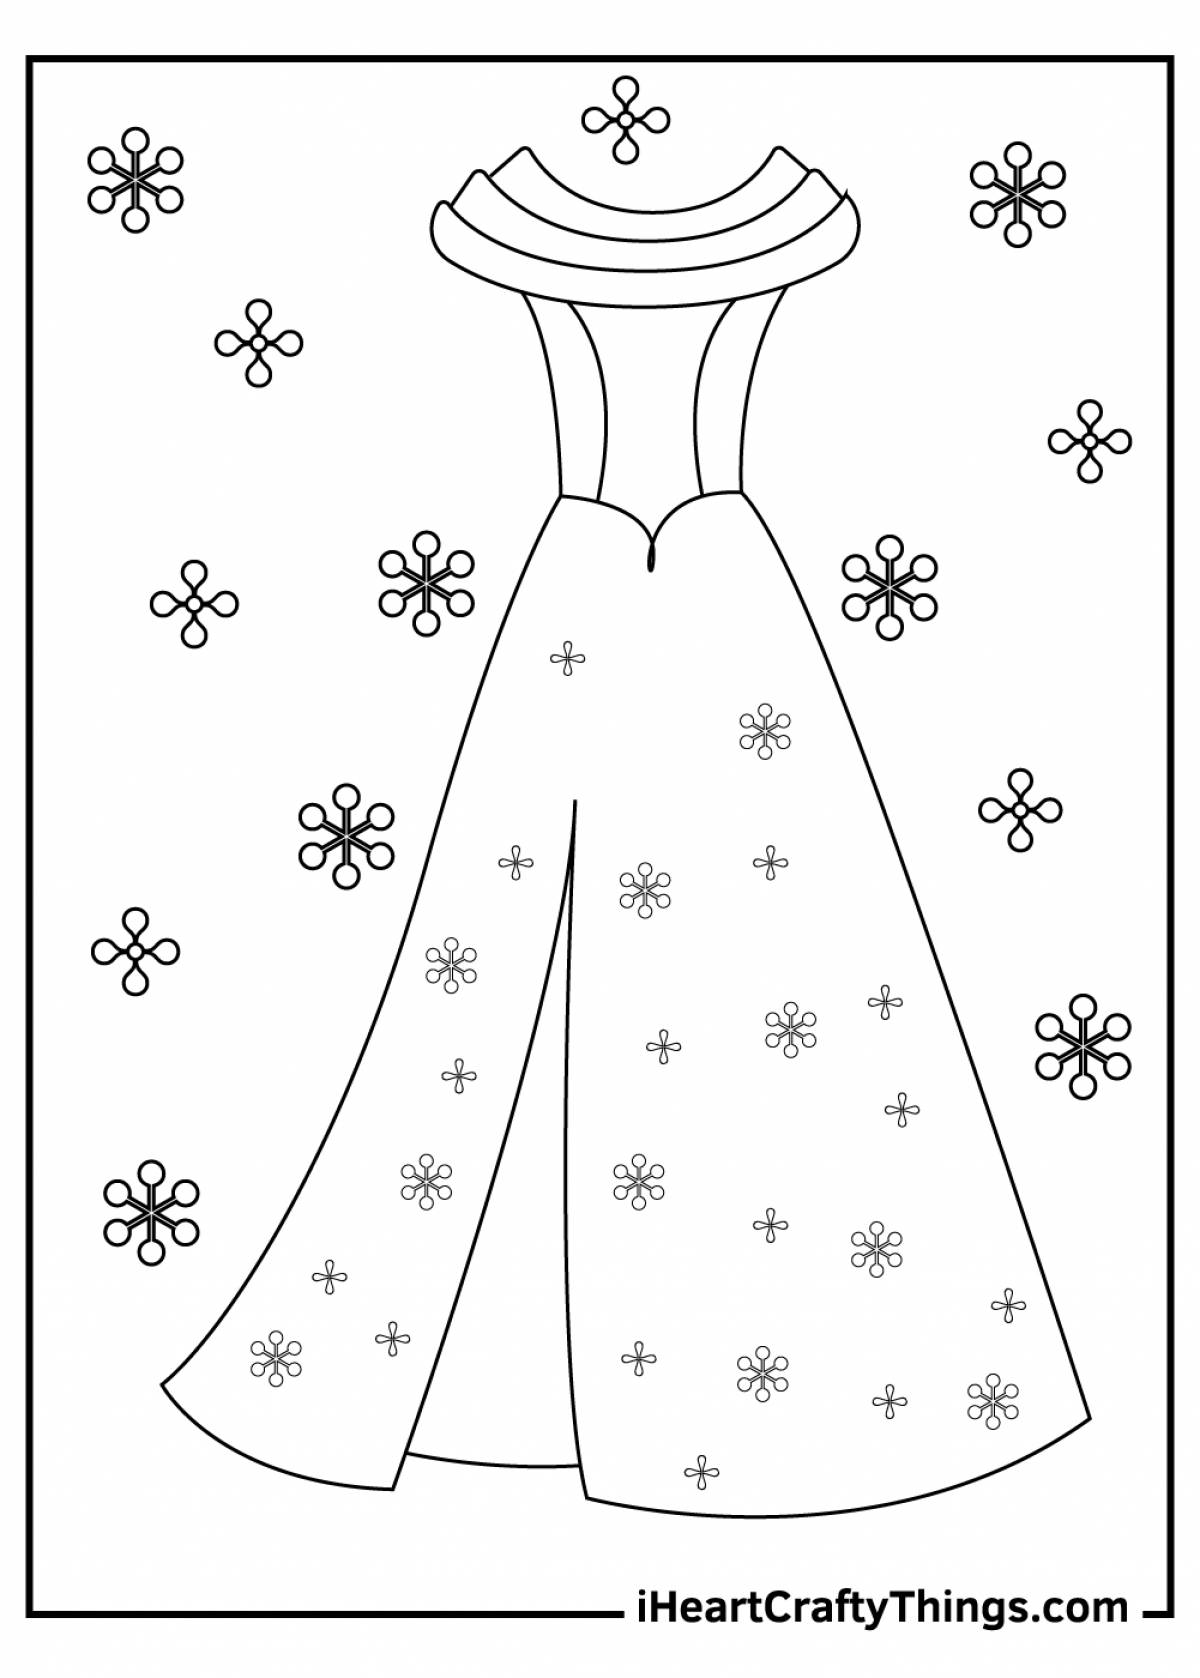 Coloring page unusual doll dress for children 4-5 years old